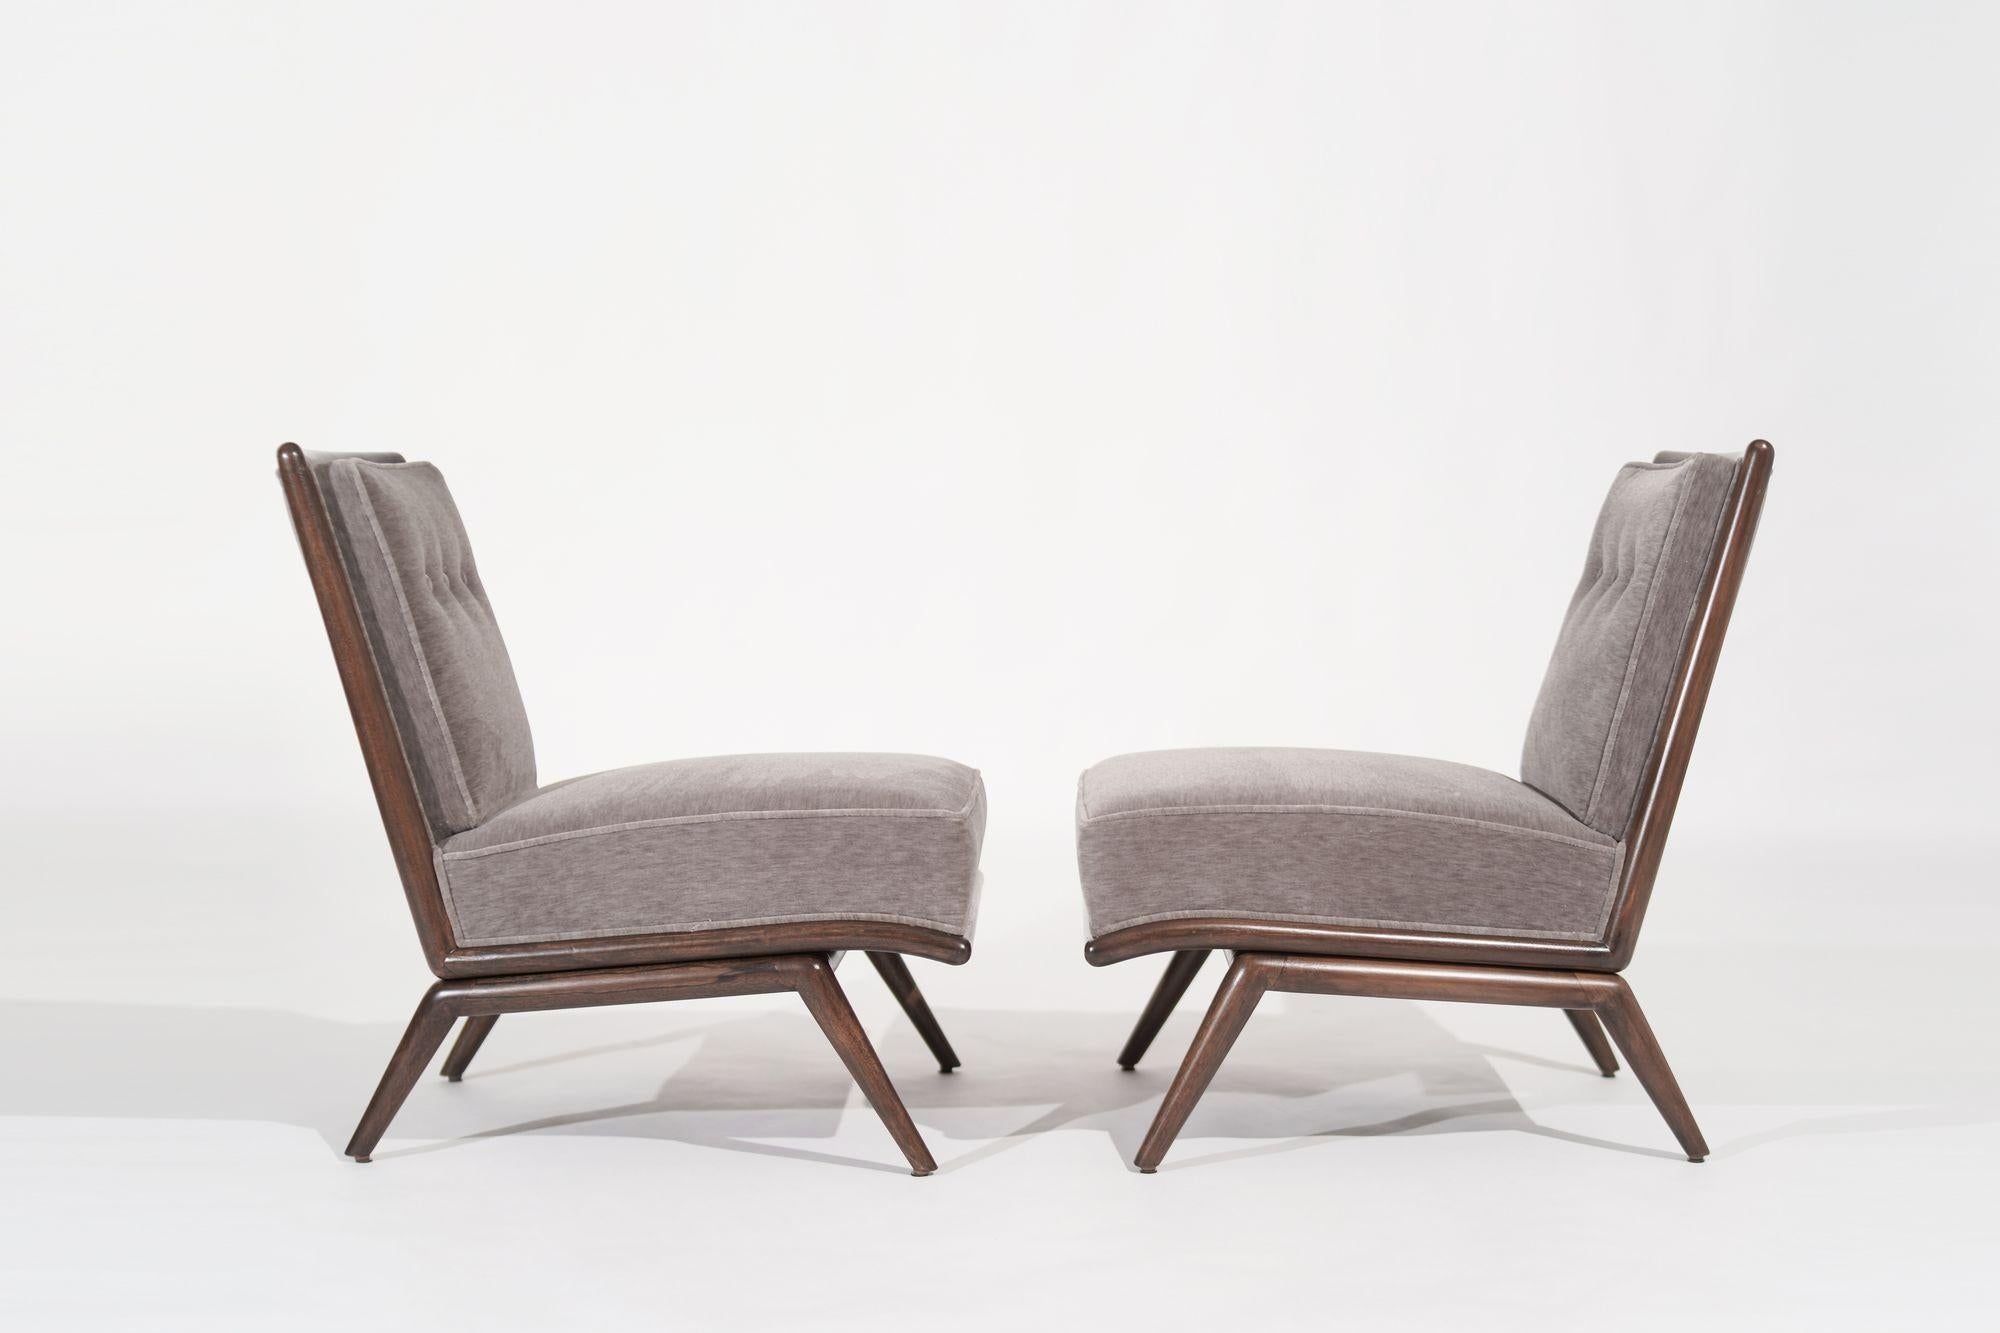 Indulge in the timeless allure of mid-century design with this pair of slipper chairs originally envisioned by the legendary T.H. Robsjohn-Gibbings in the 1950s, meticulously revived to their former glory by Stamford Modern. Adorned in opulent brown